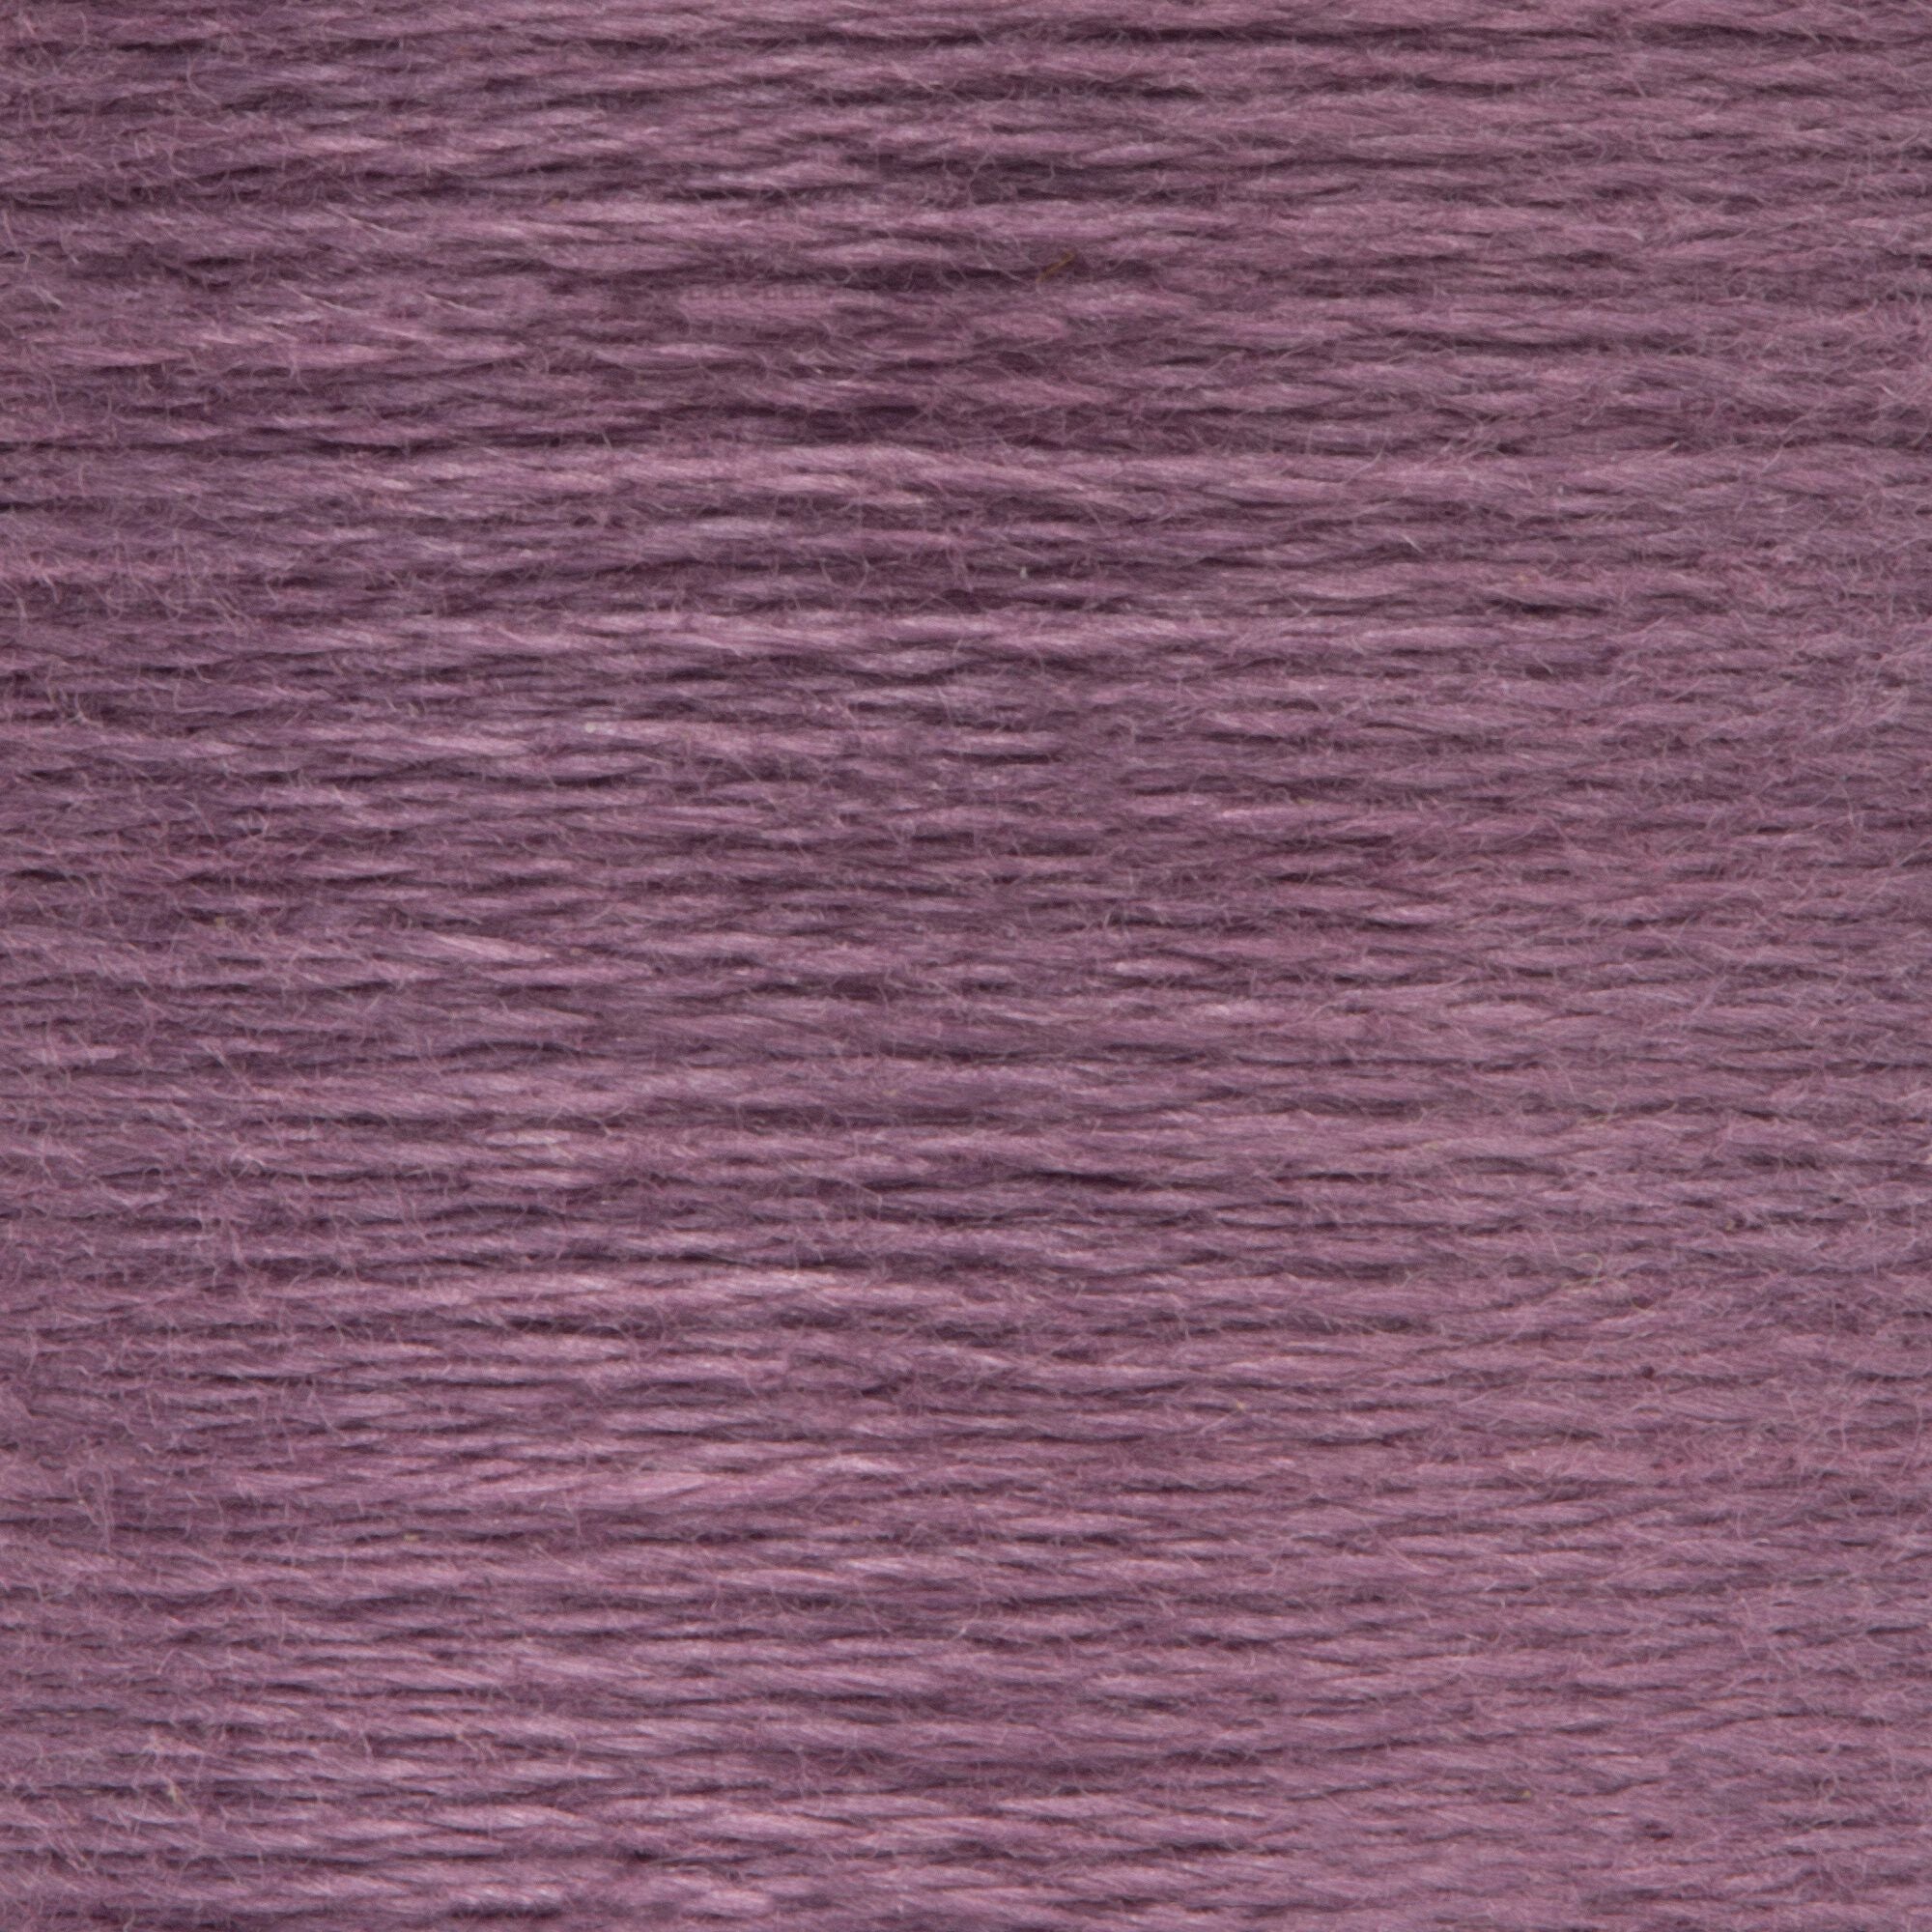 Anchor Embroidery Floss in Amethyst Med